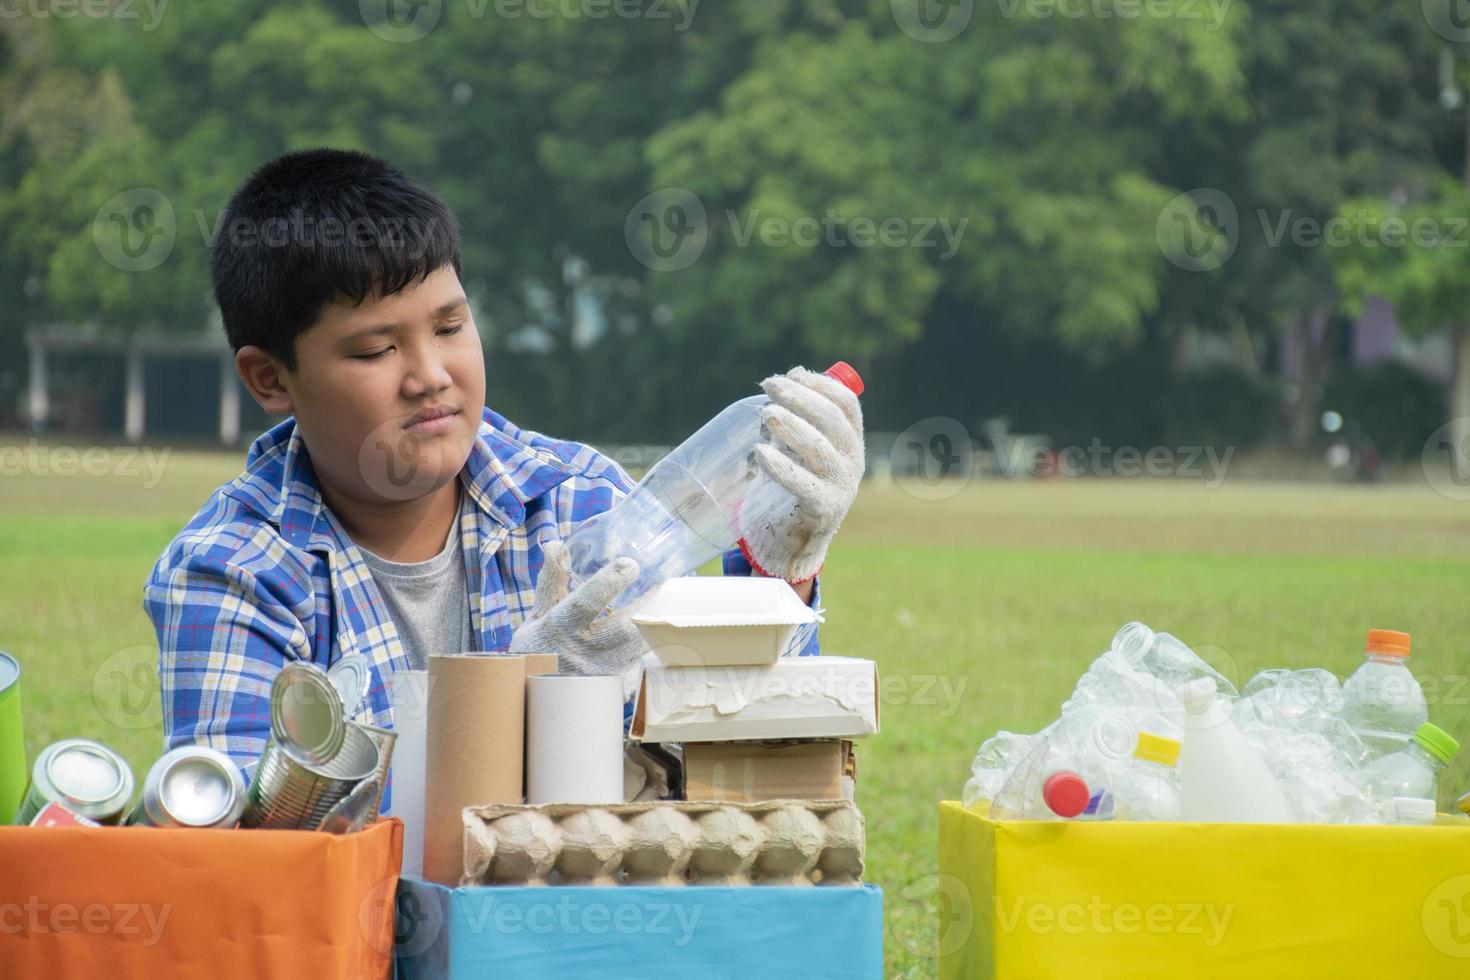 Asian boys are separating garbages and putting them into the boxes in front of them near building, soft and selective focus, environment care, community service and summer vacation activities concept. photo